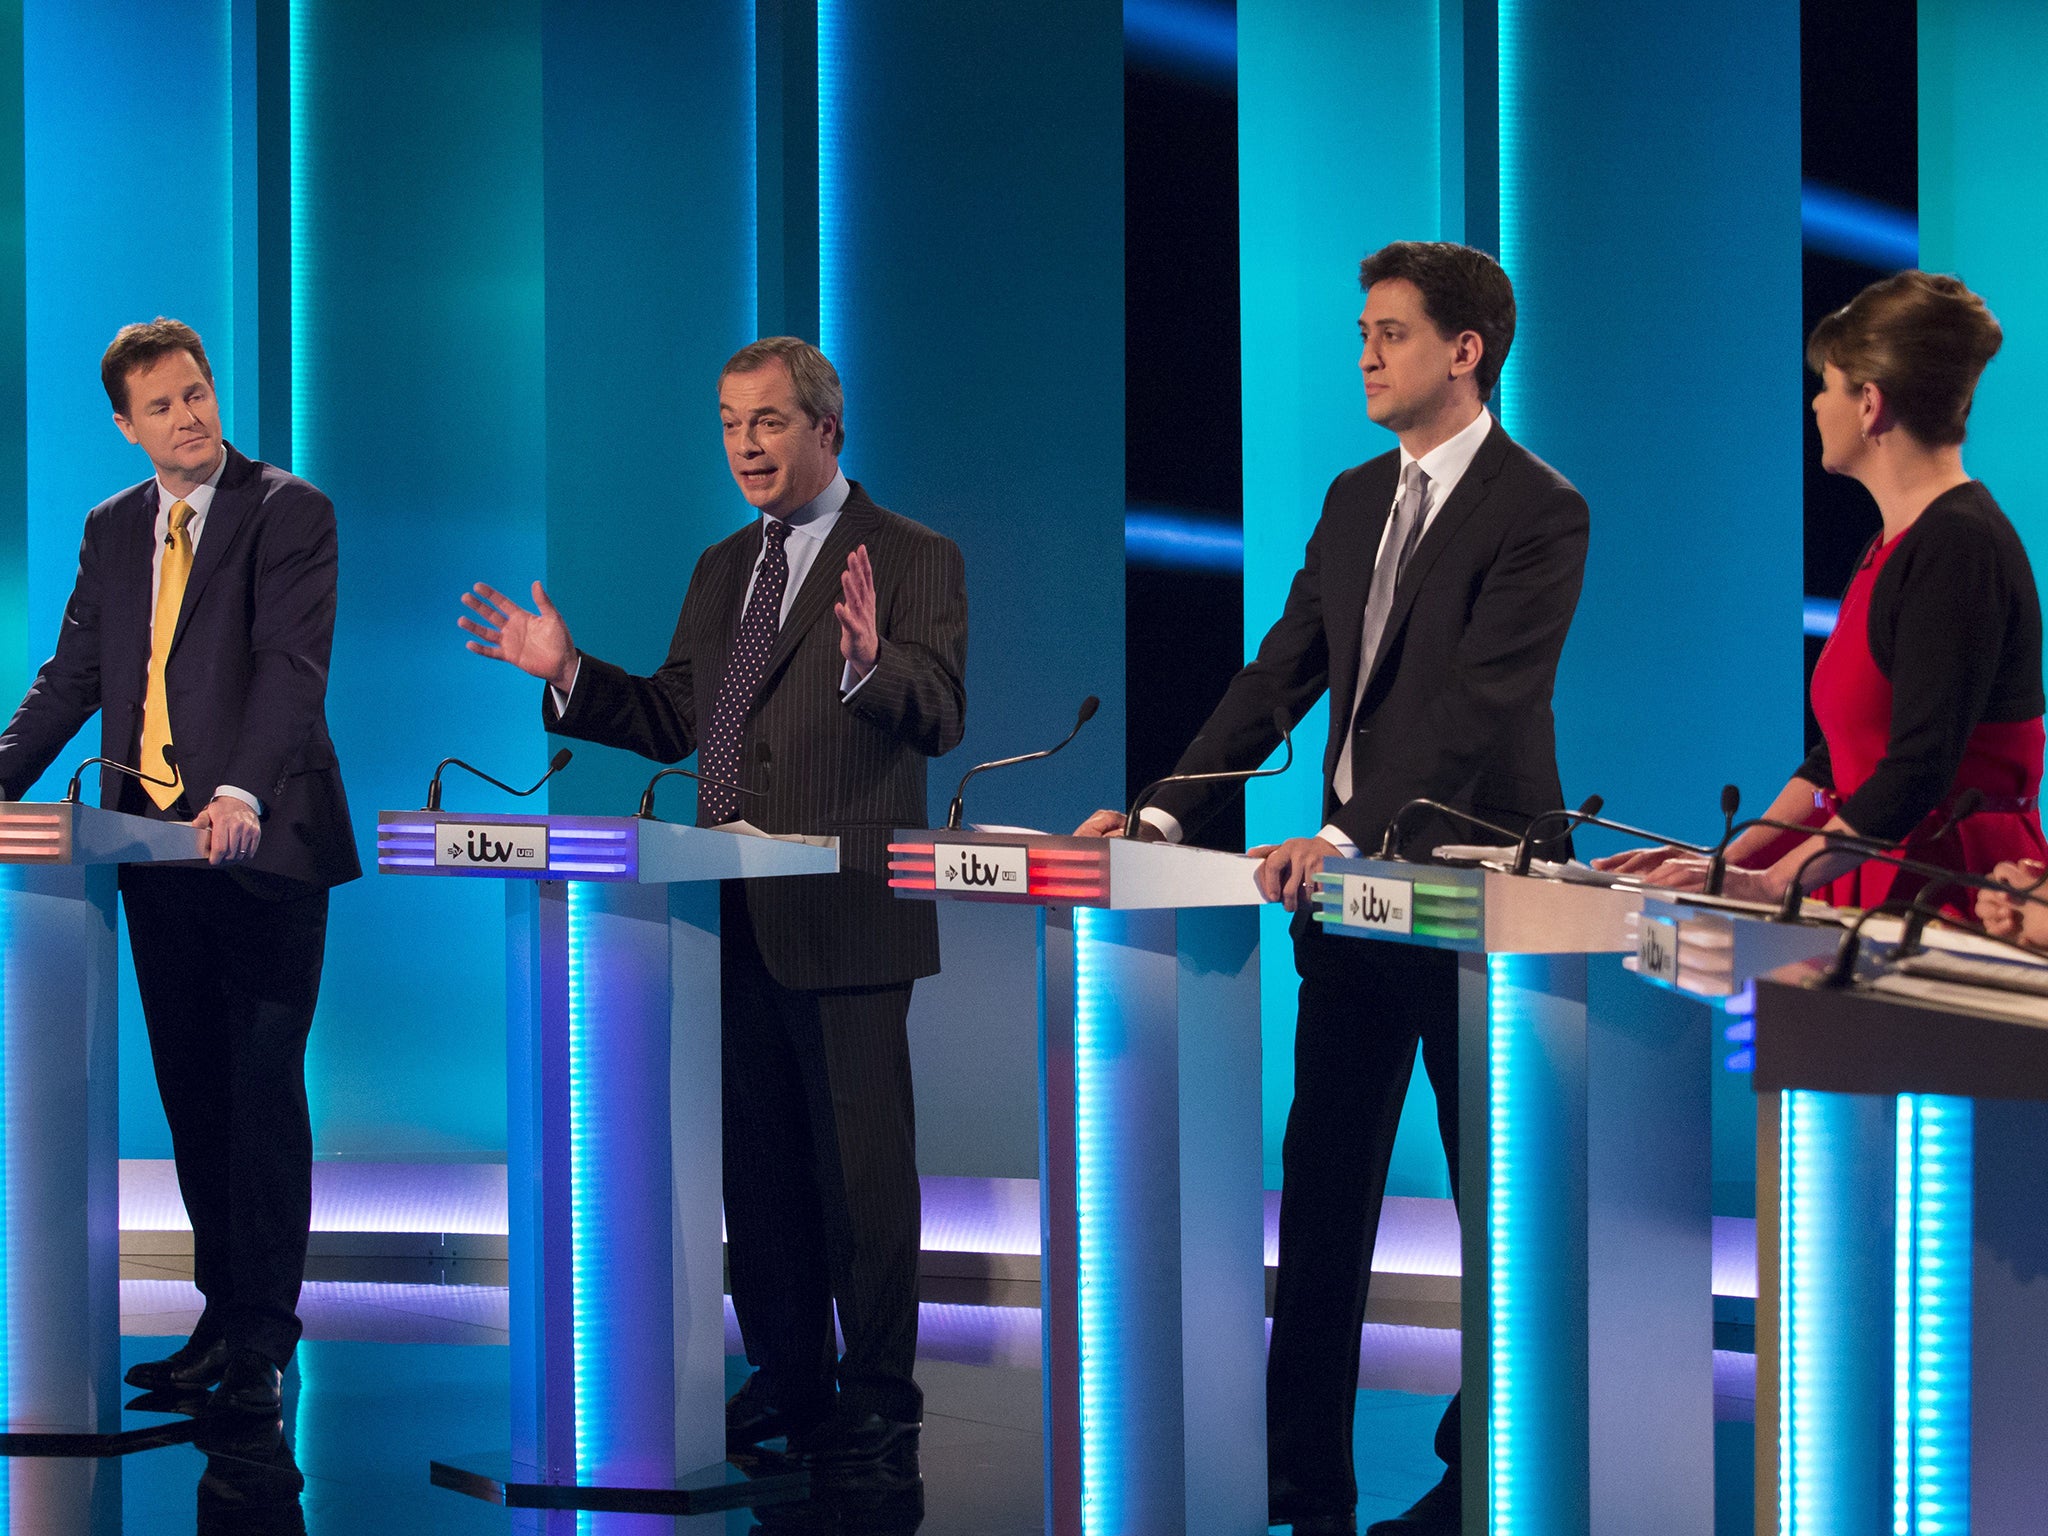 Election 2017 TV debates: Who is taking part? When are they taking place? Which channel?